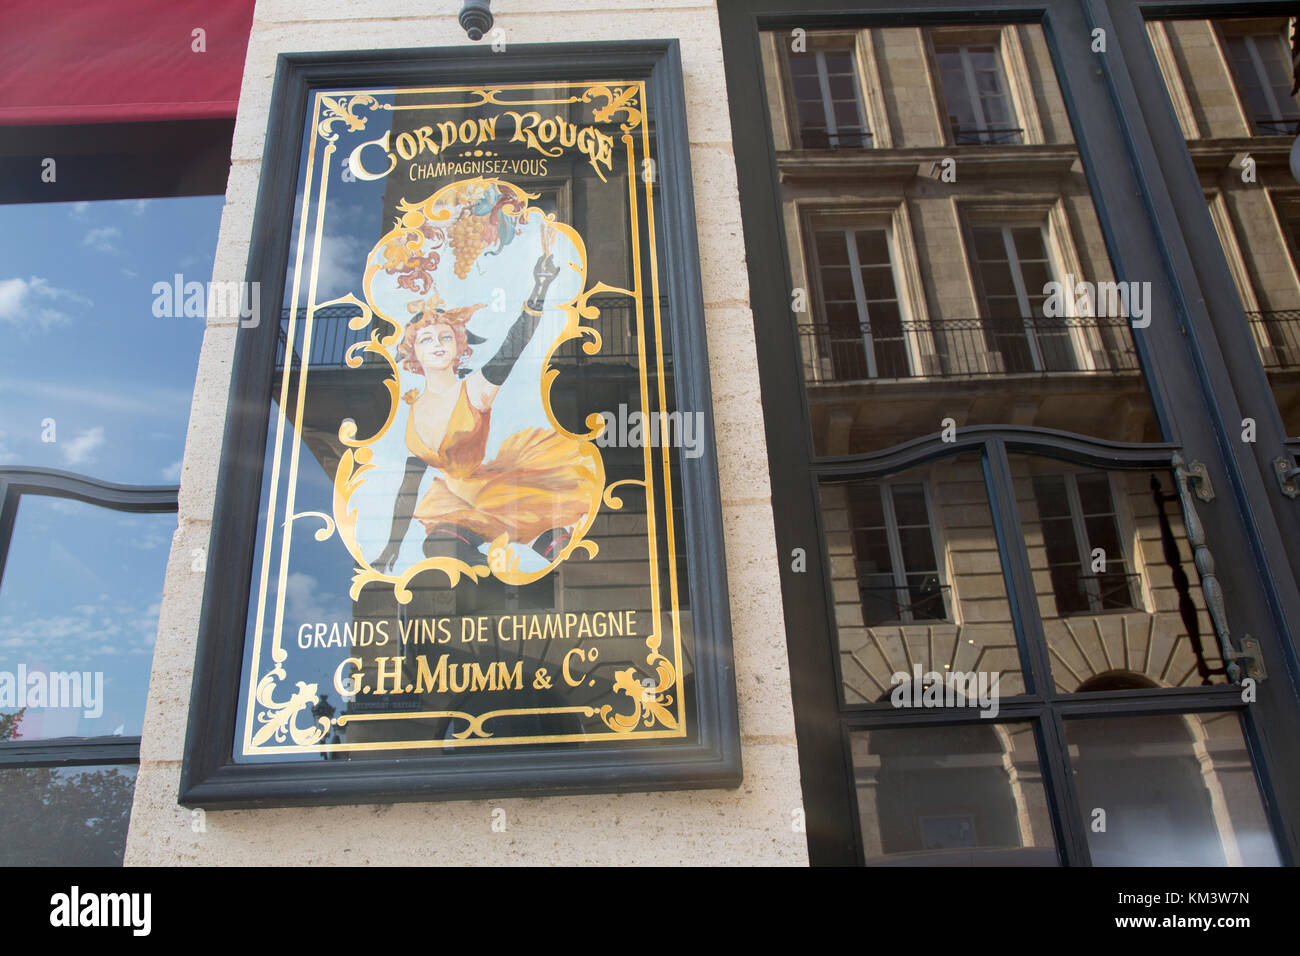 Champagne Advertisning at Cafe Bellini, Bordeaux; France Stock Photo